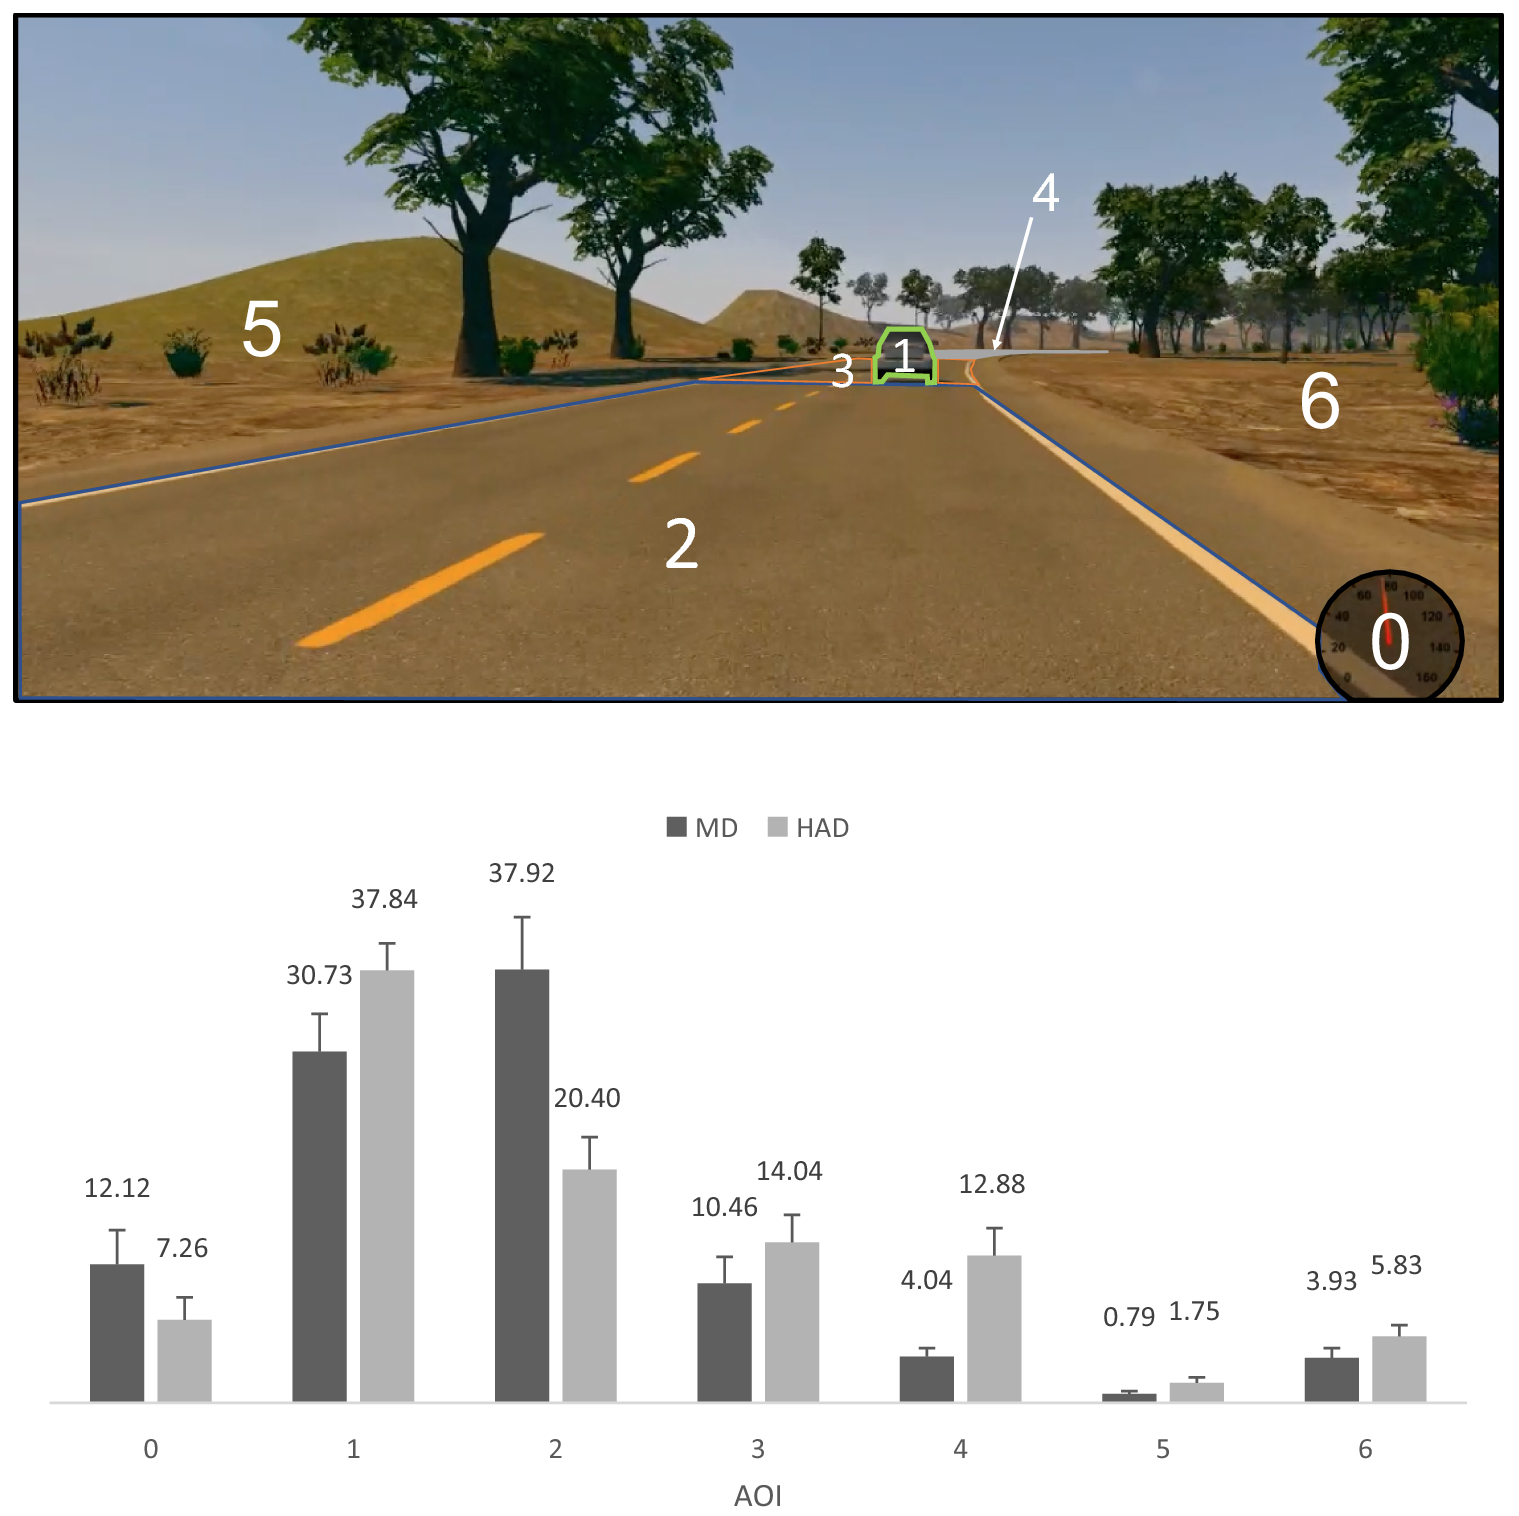 scan paths under manual and highly driving | Reports